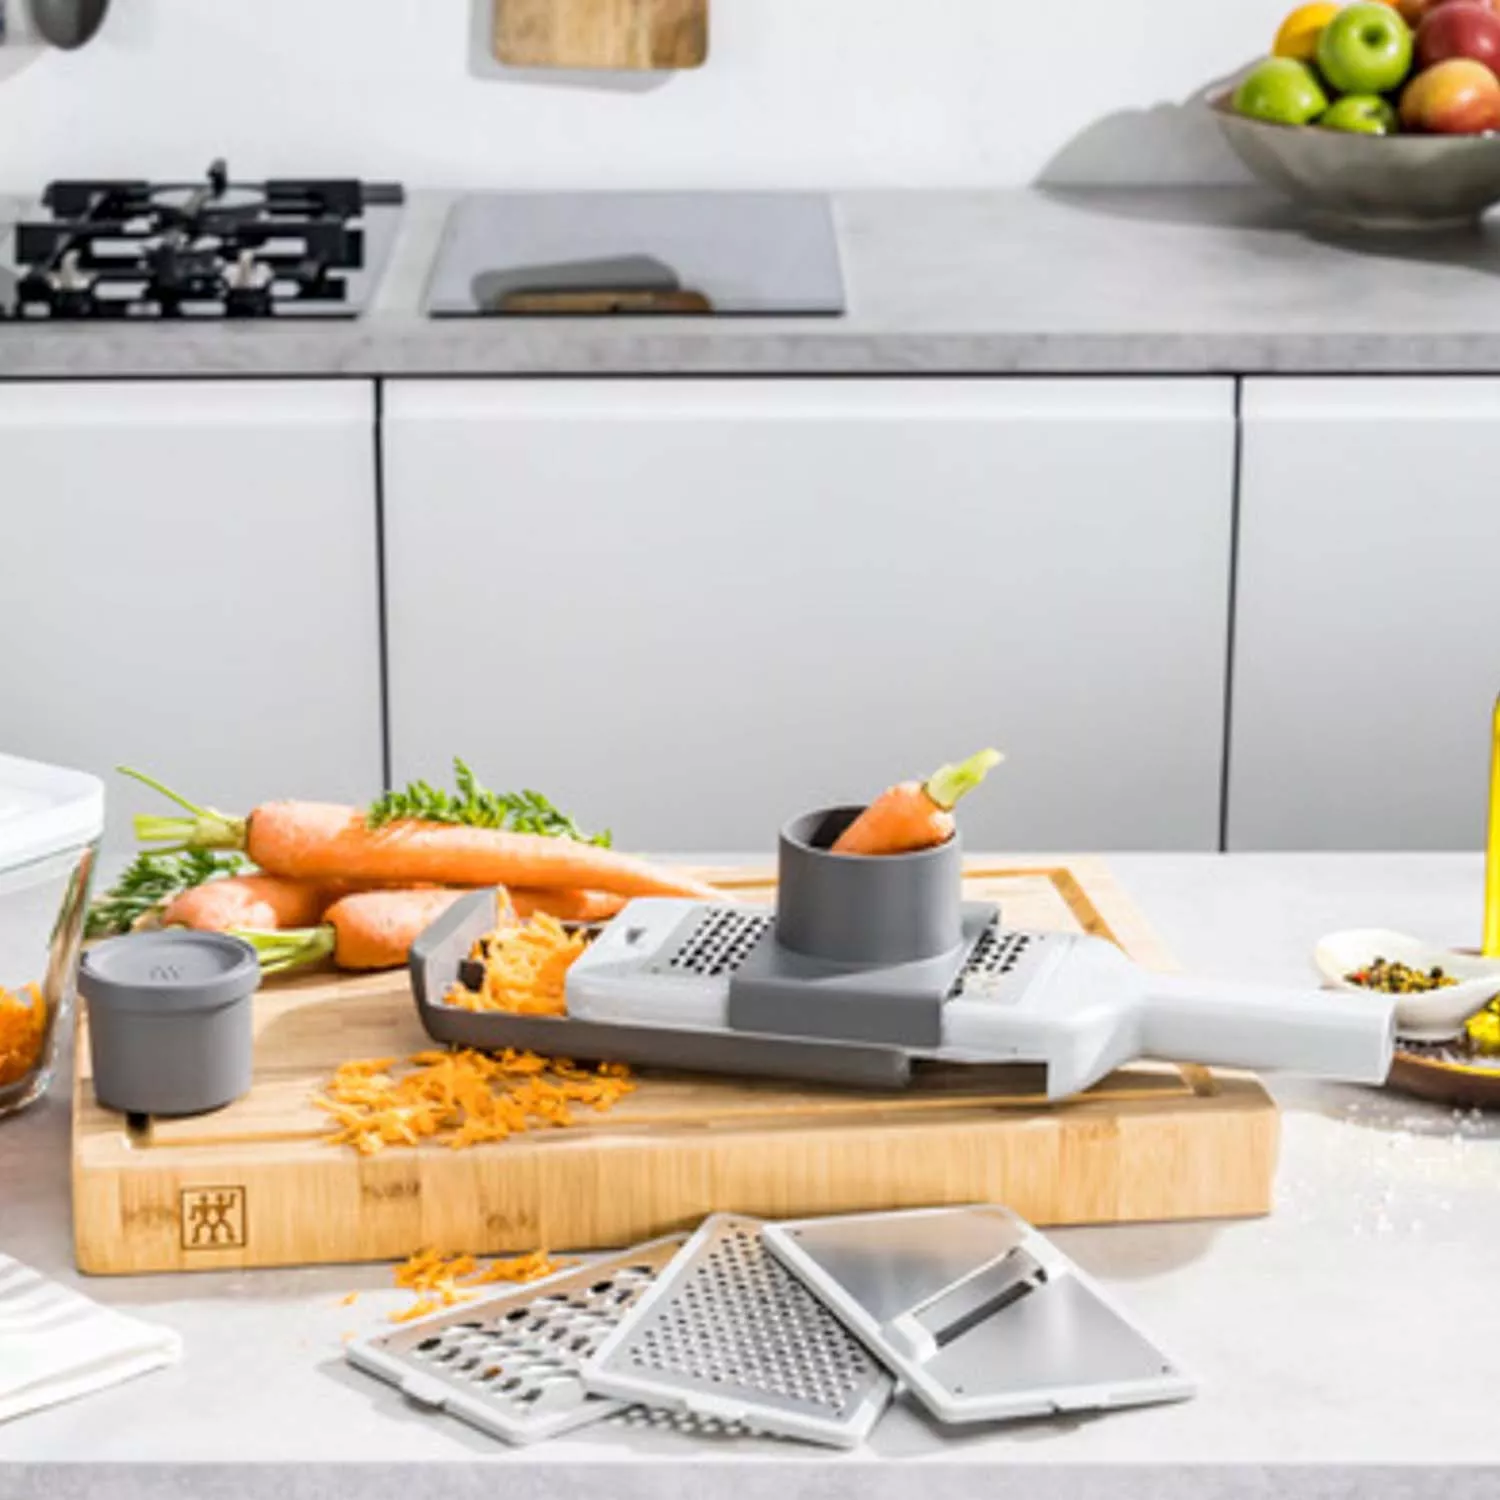 Graters, Peelers & Slicers - Kitchen Accessories - Kitchen & Cooking